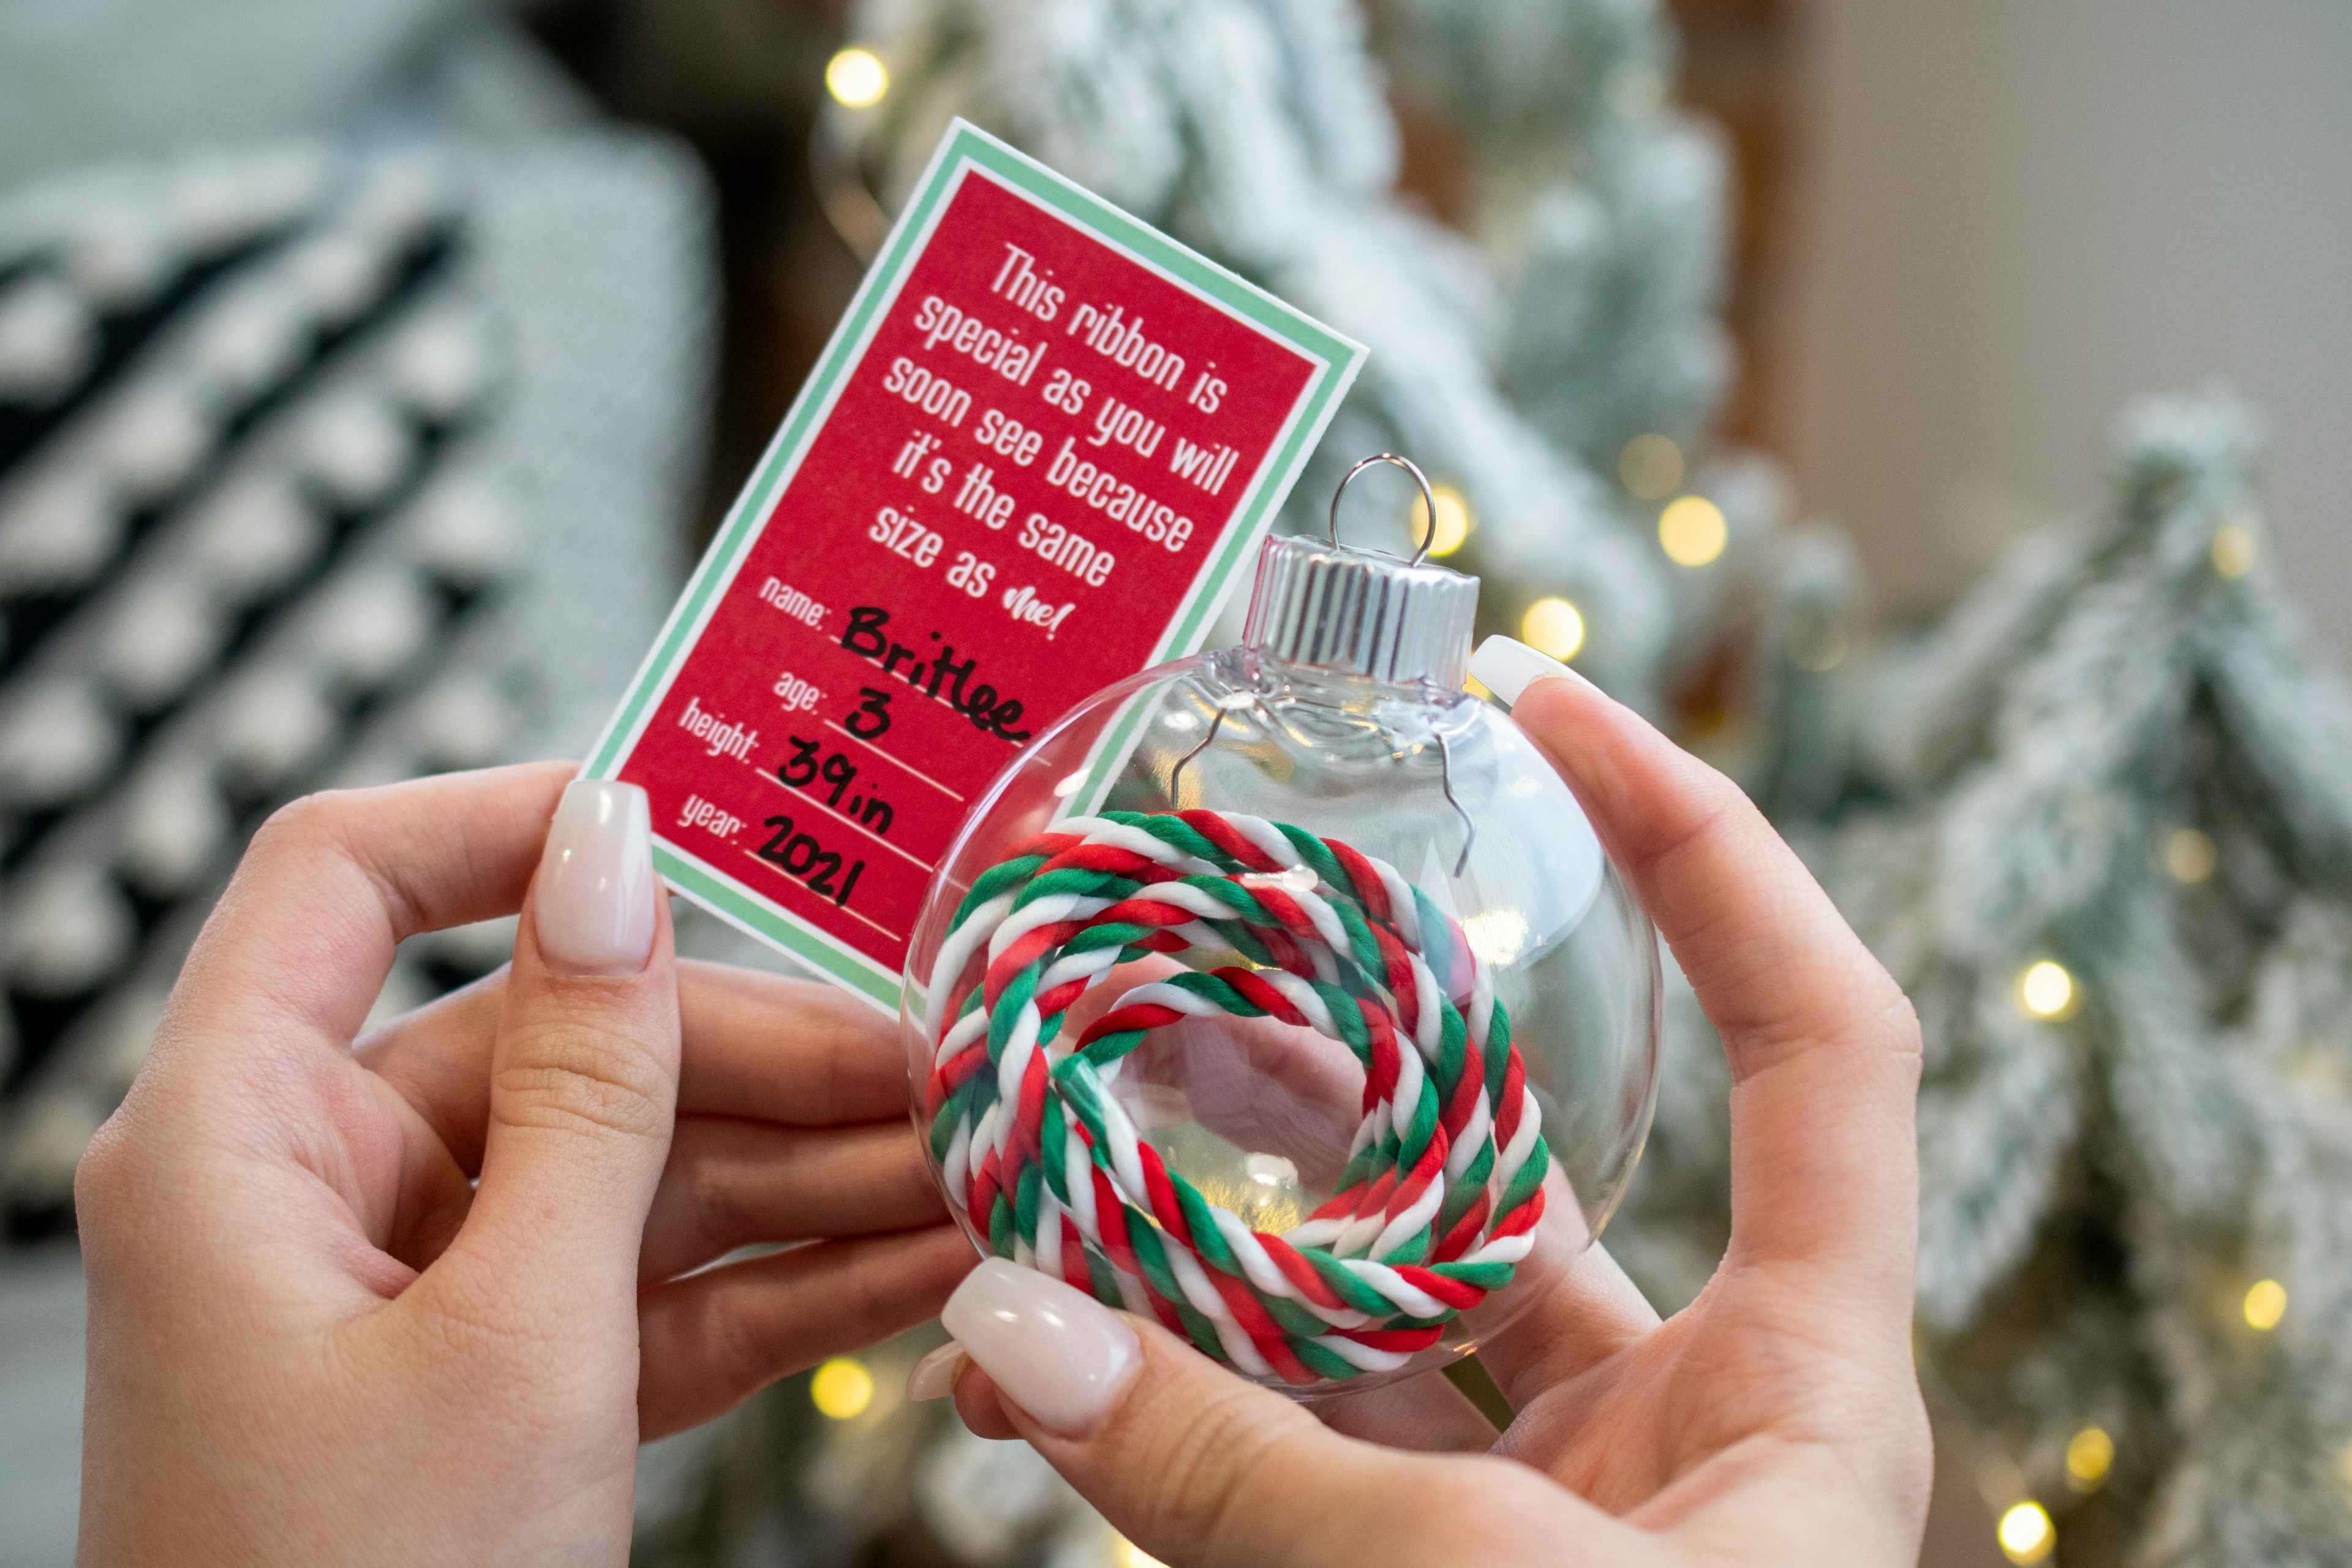 Someone holding a clear ornament with a ribbon inside it with a tag that says "This ribbon is special as you will soon see because it's t...